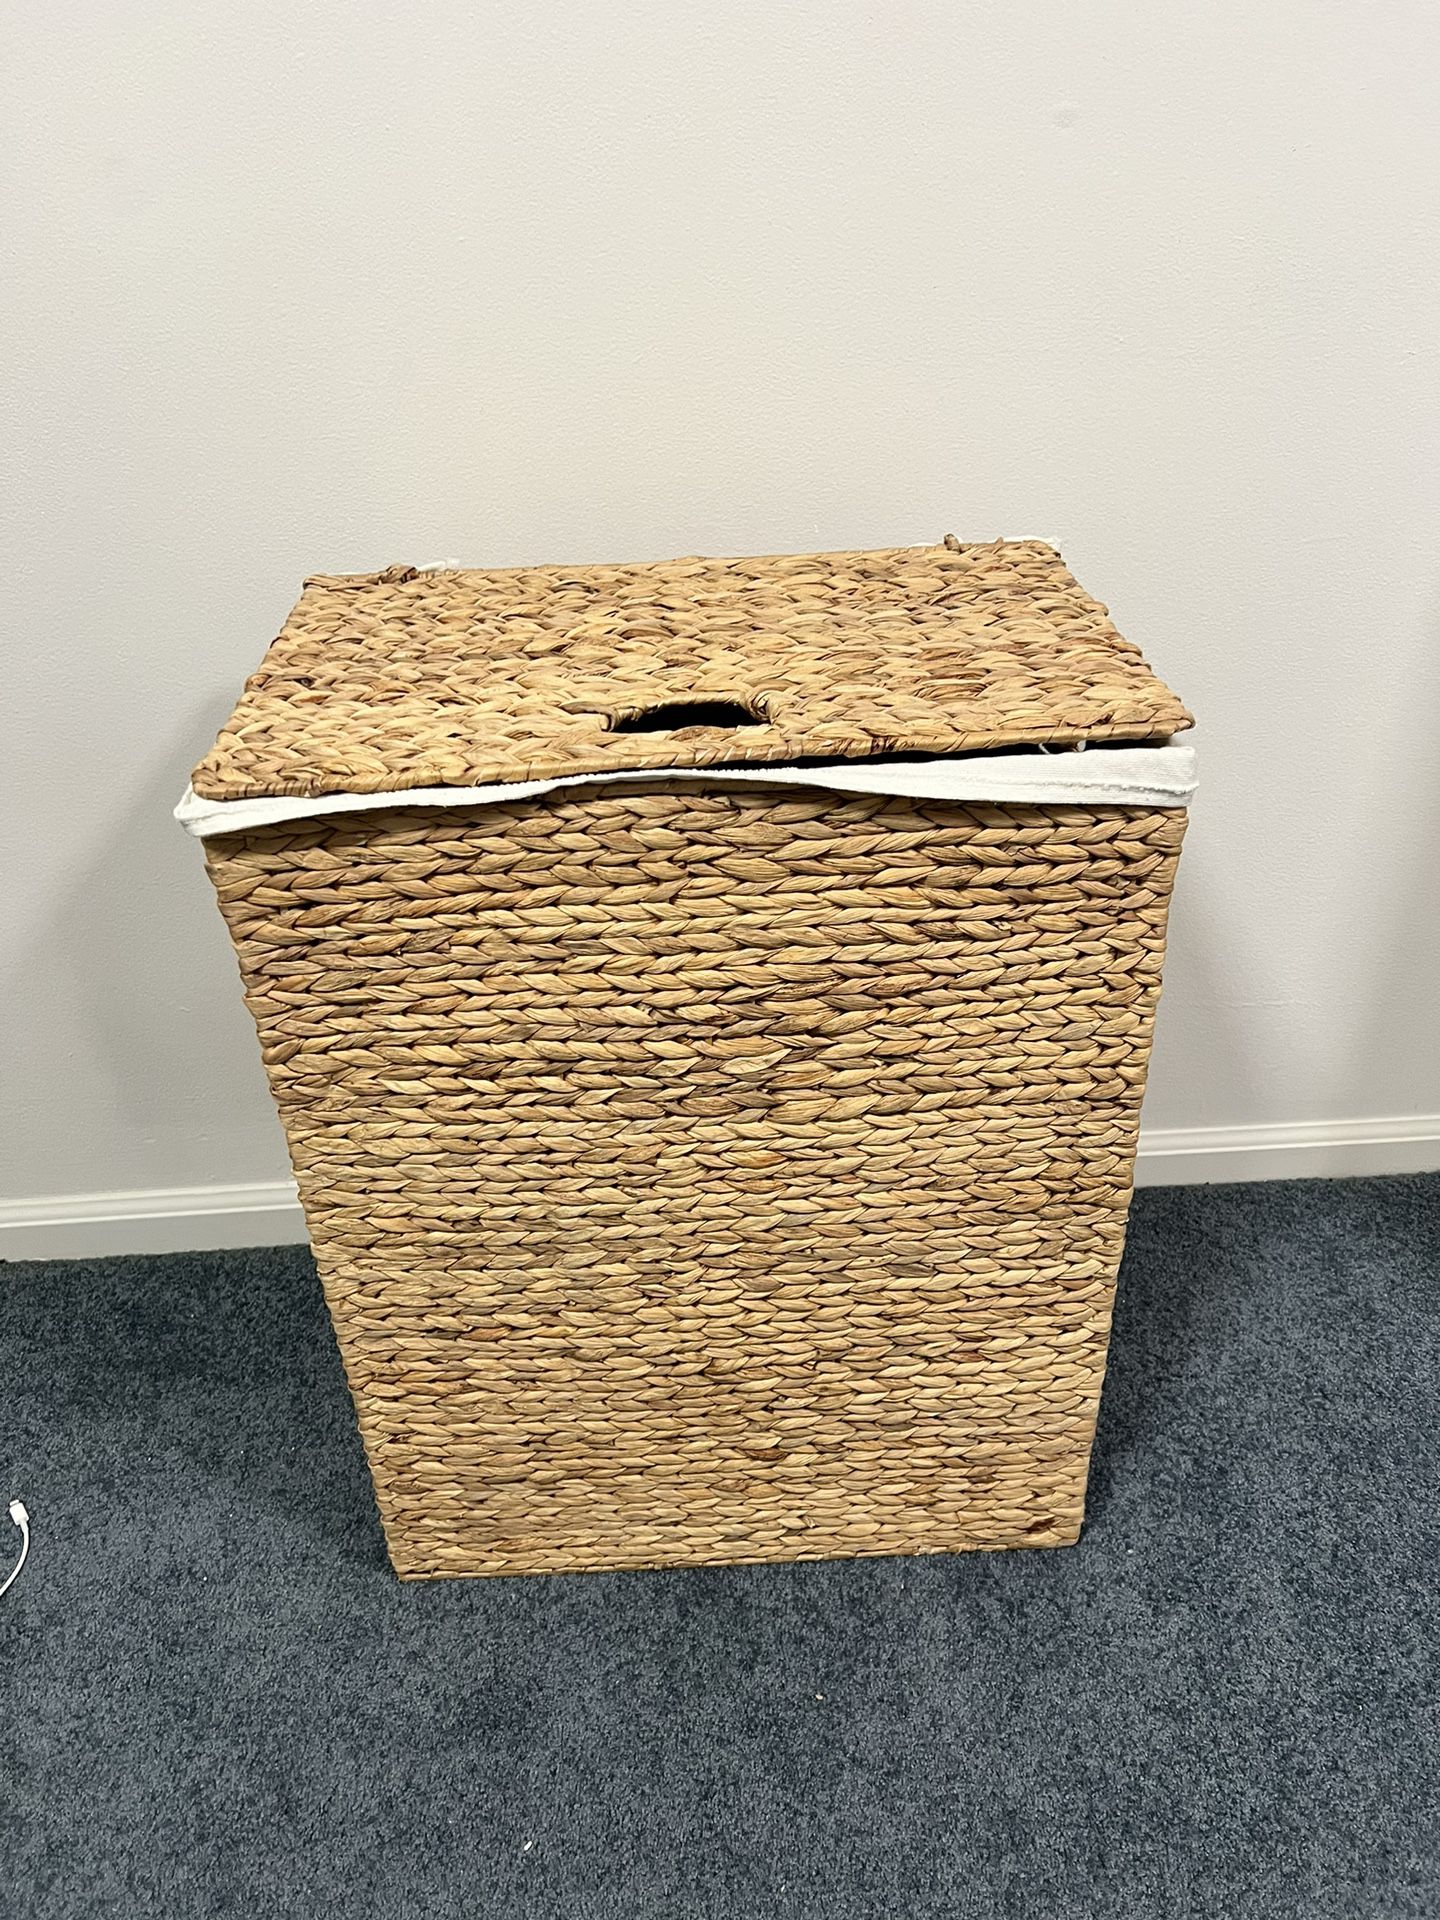 Stylish and Portable Water Hyacinth Wicker Laundry Hamper